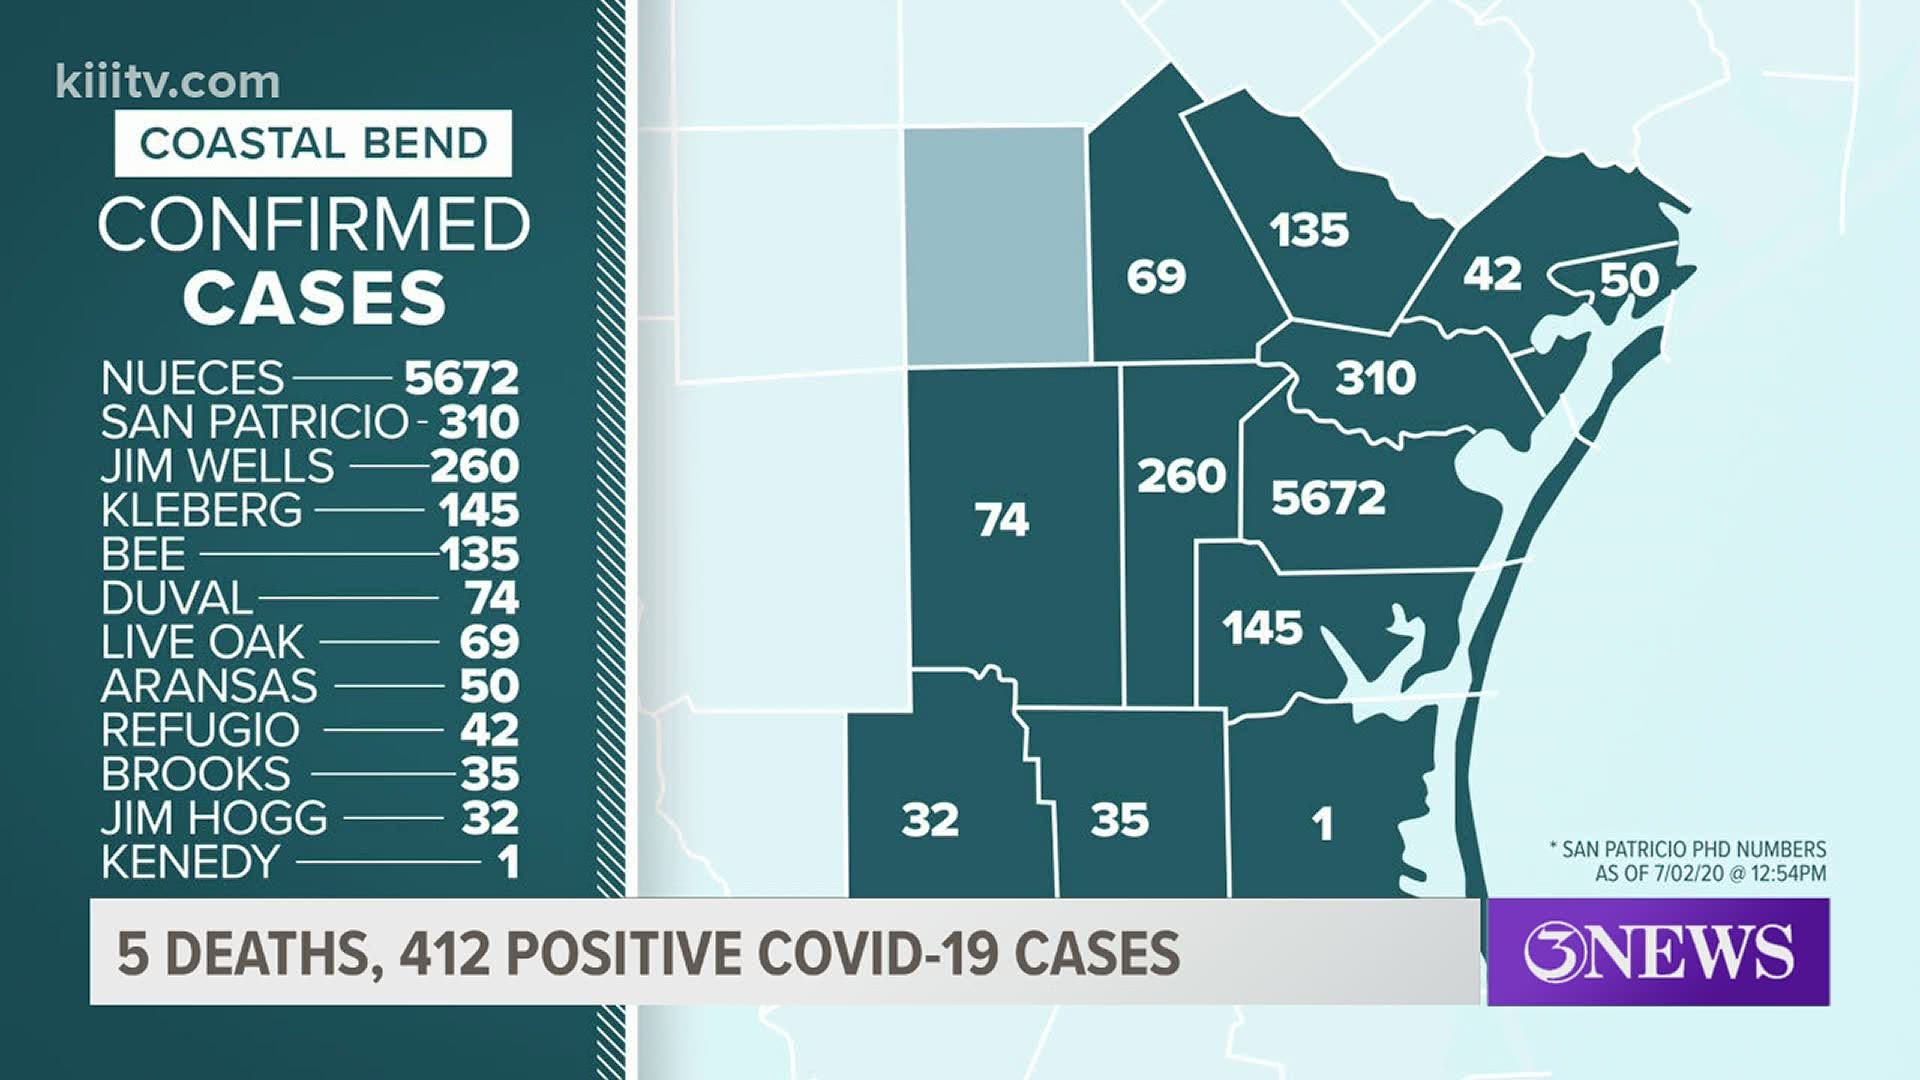 Here's a breakdown of cases in the Coastal Bend.